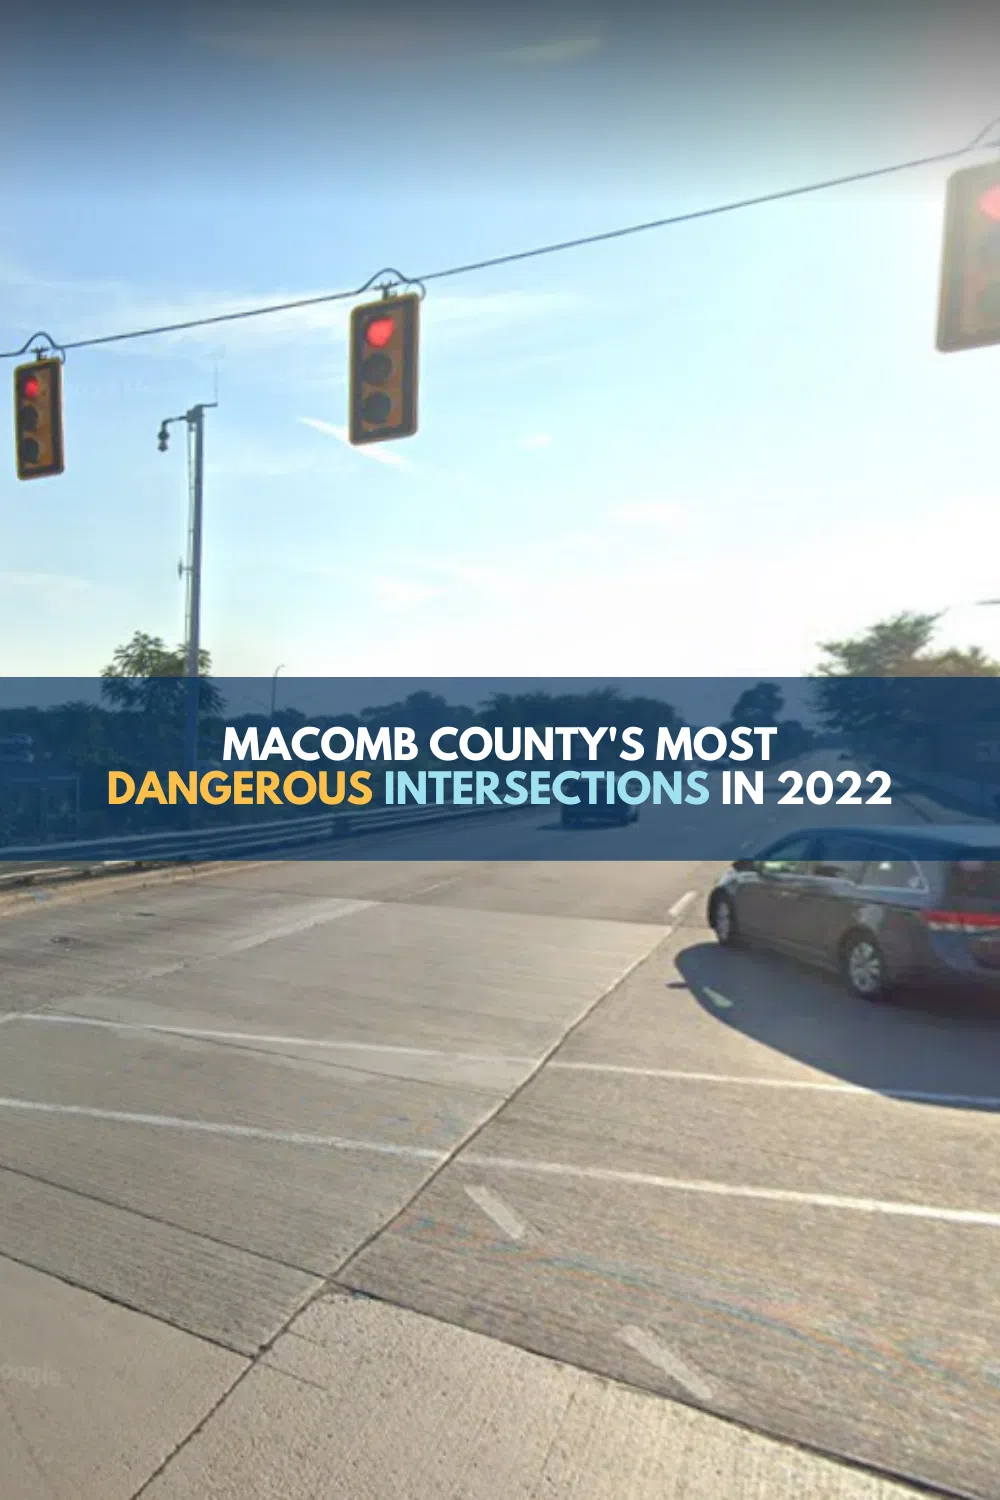 Macomb County’s Most Dangerous Intersections in 2022